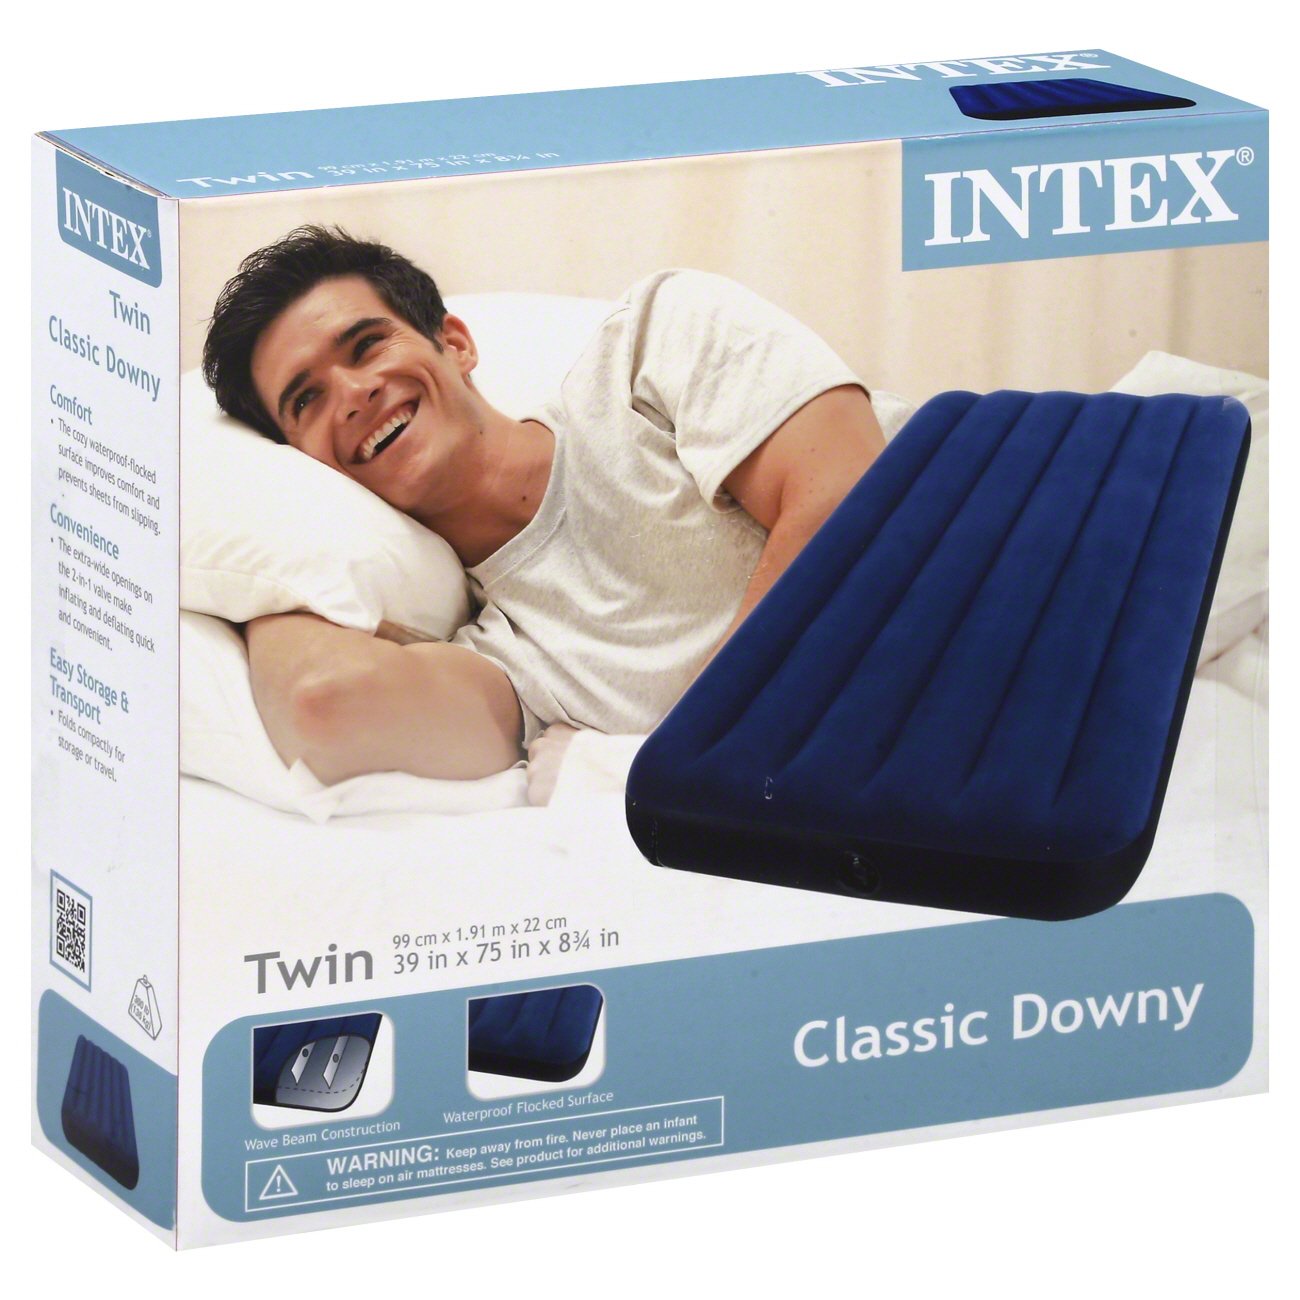 Twin Size Inflatable Air Bed Mattress Intex Classic Downy Blue Pump Not Included 